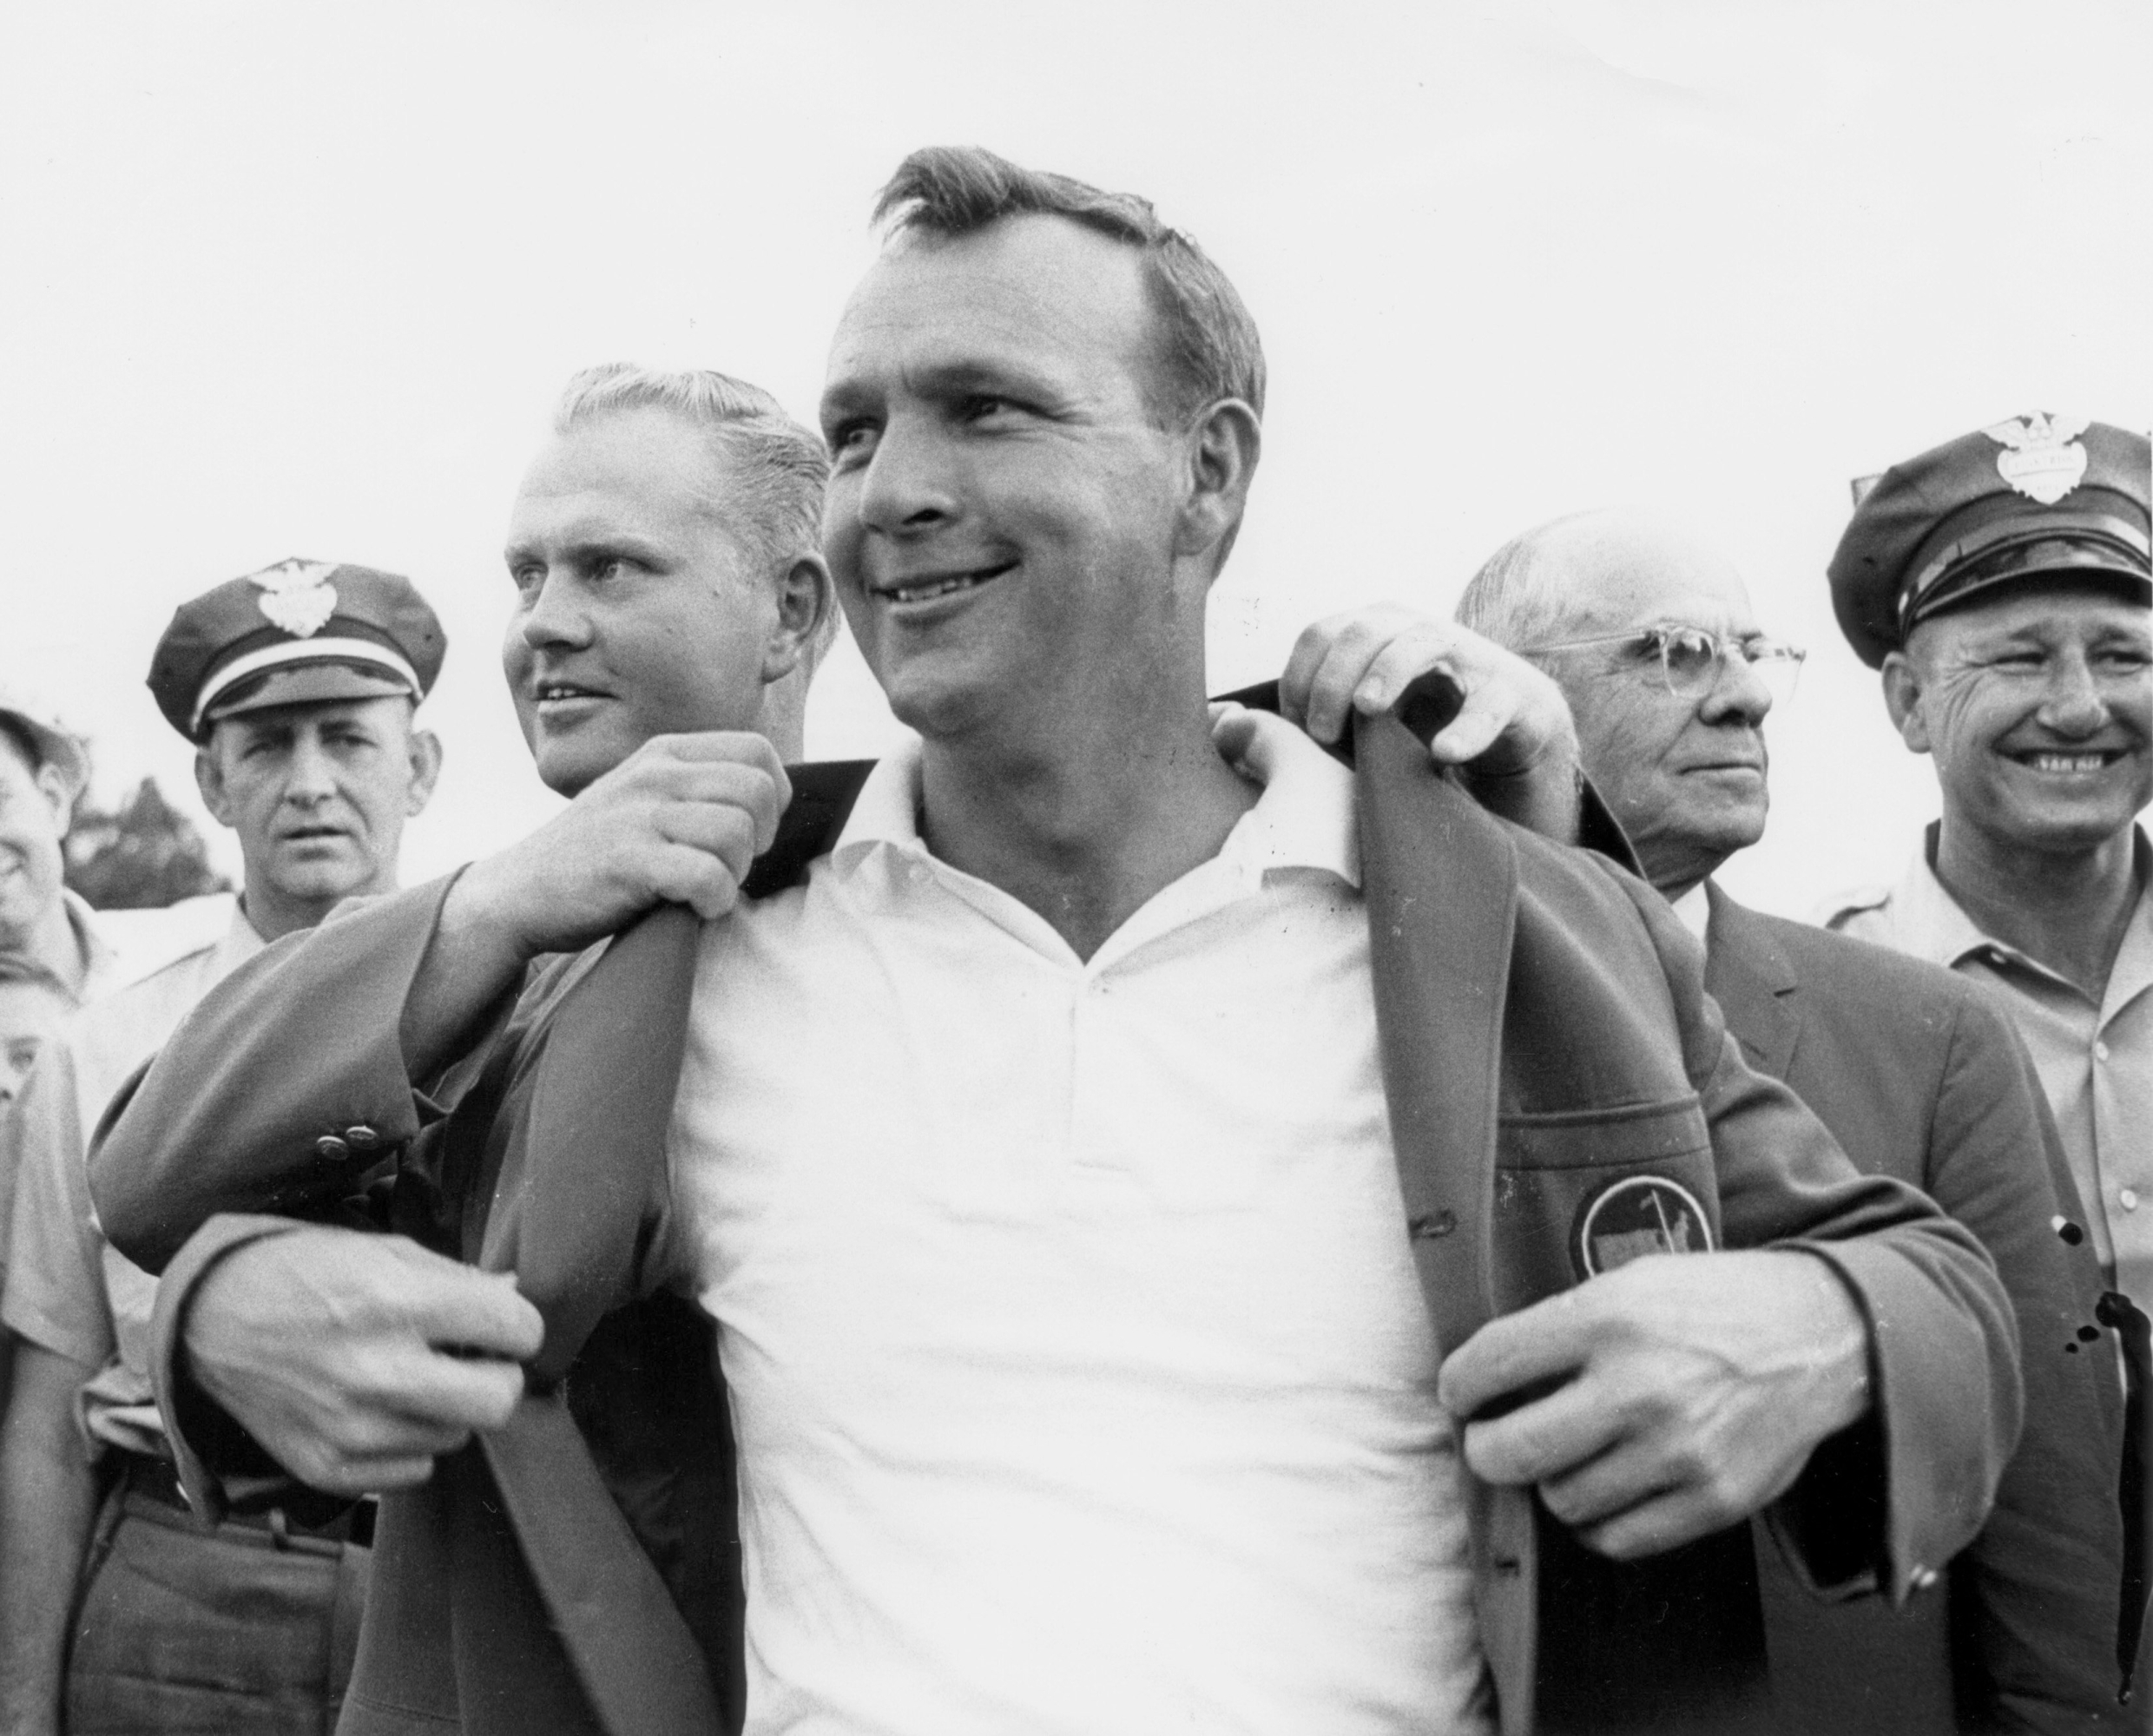 Arnold Palmer Puts On The Green Jacket With The Help Of Jack Nicklaus During The Presentation Ceremony Of The 1964 Masters Tournament  (Photo by Augusta National/Getty Images)